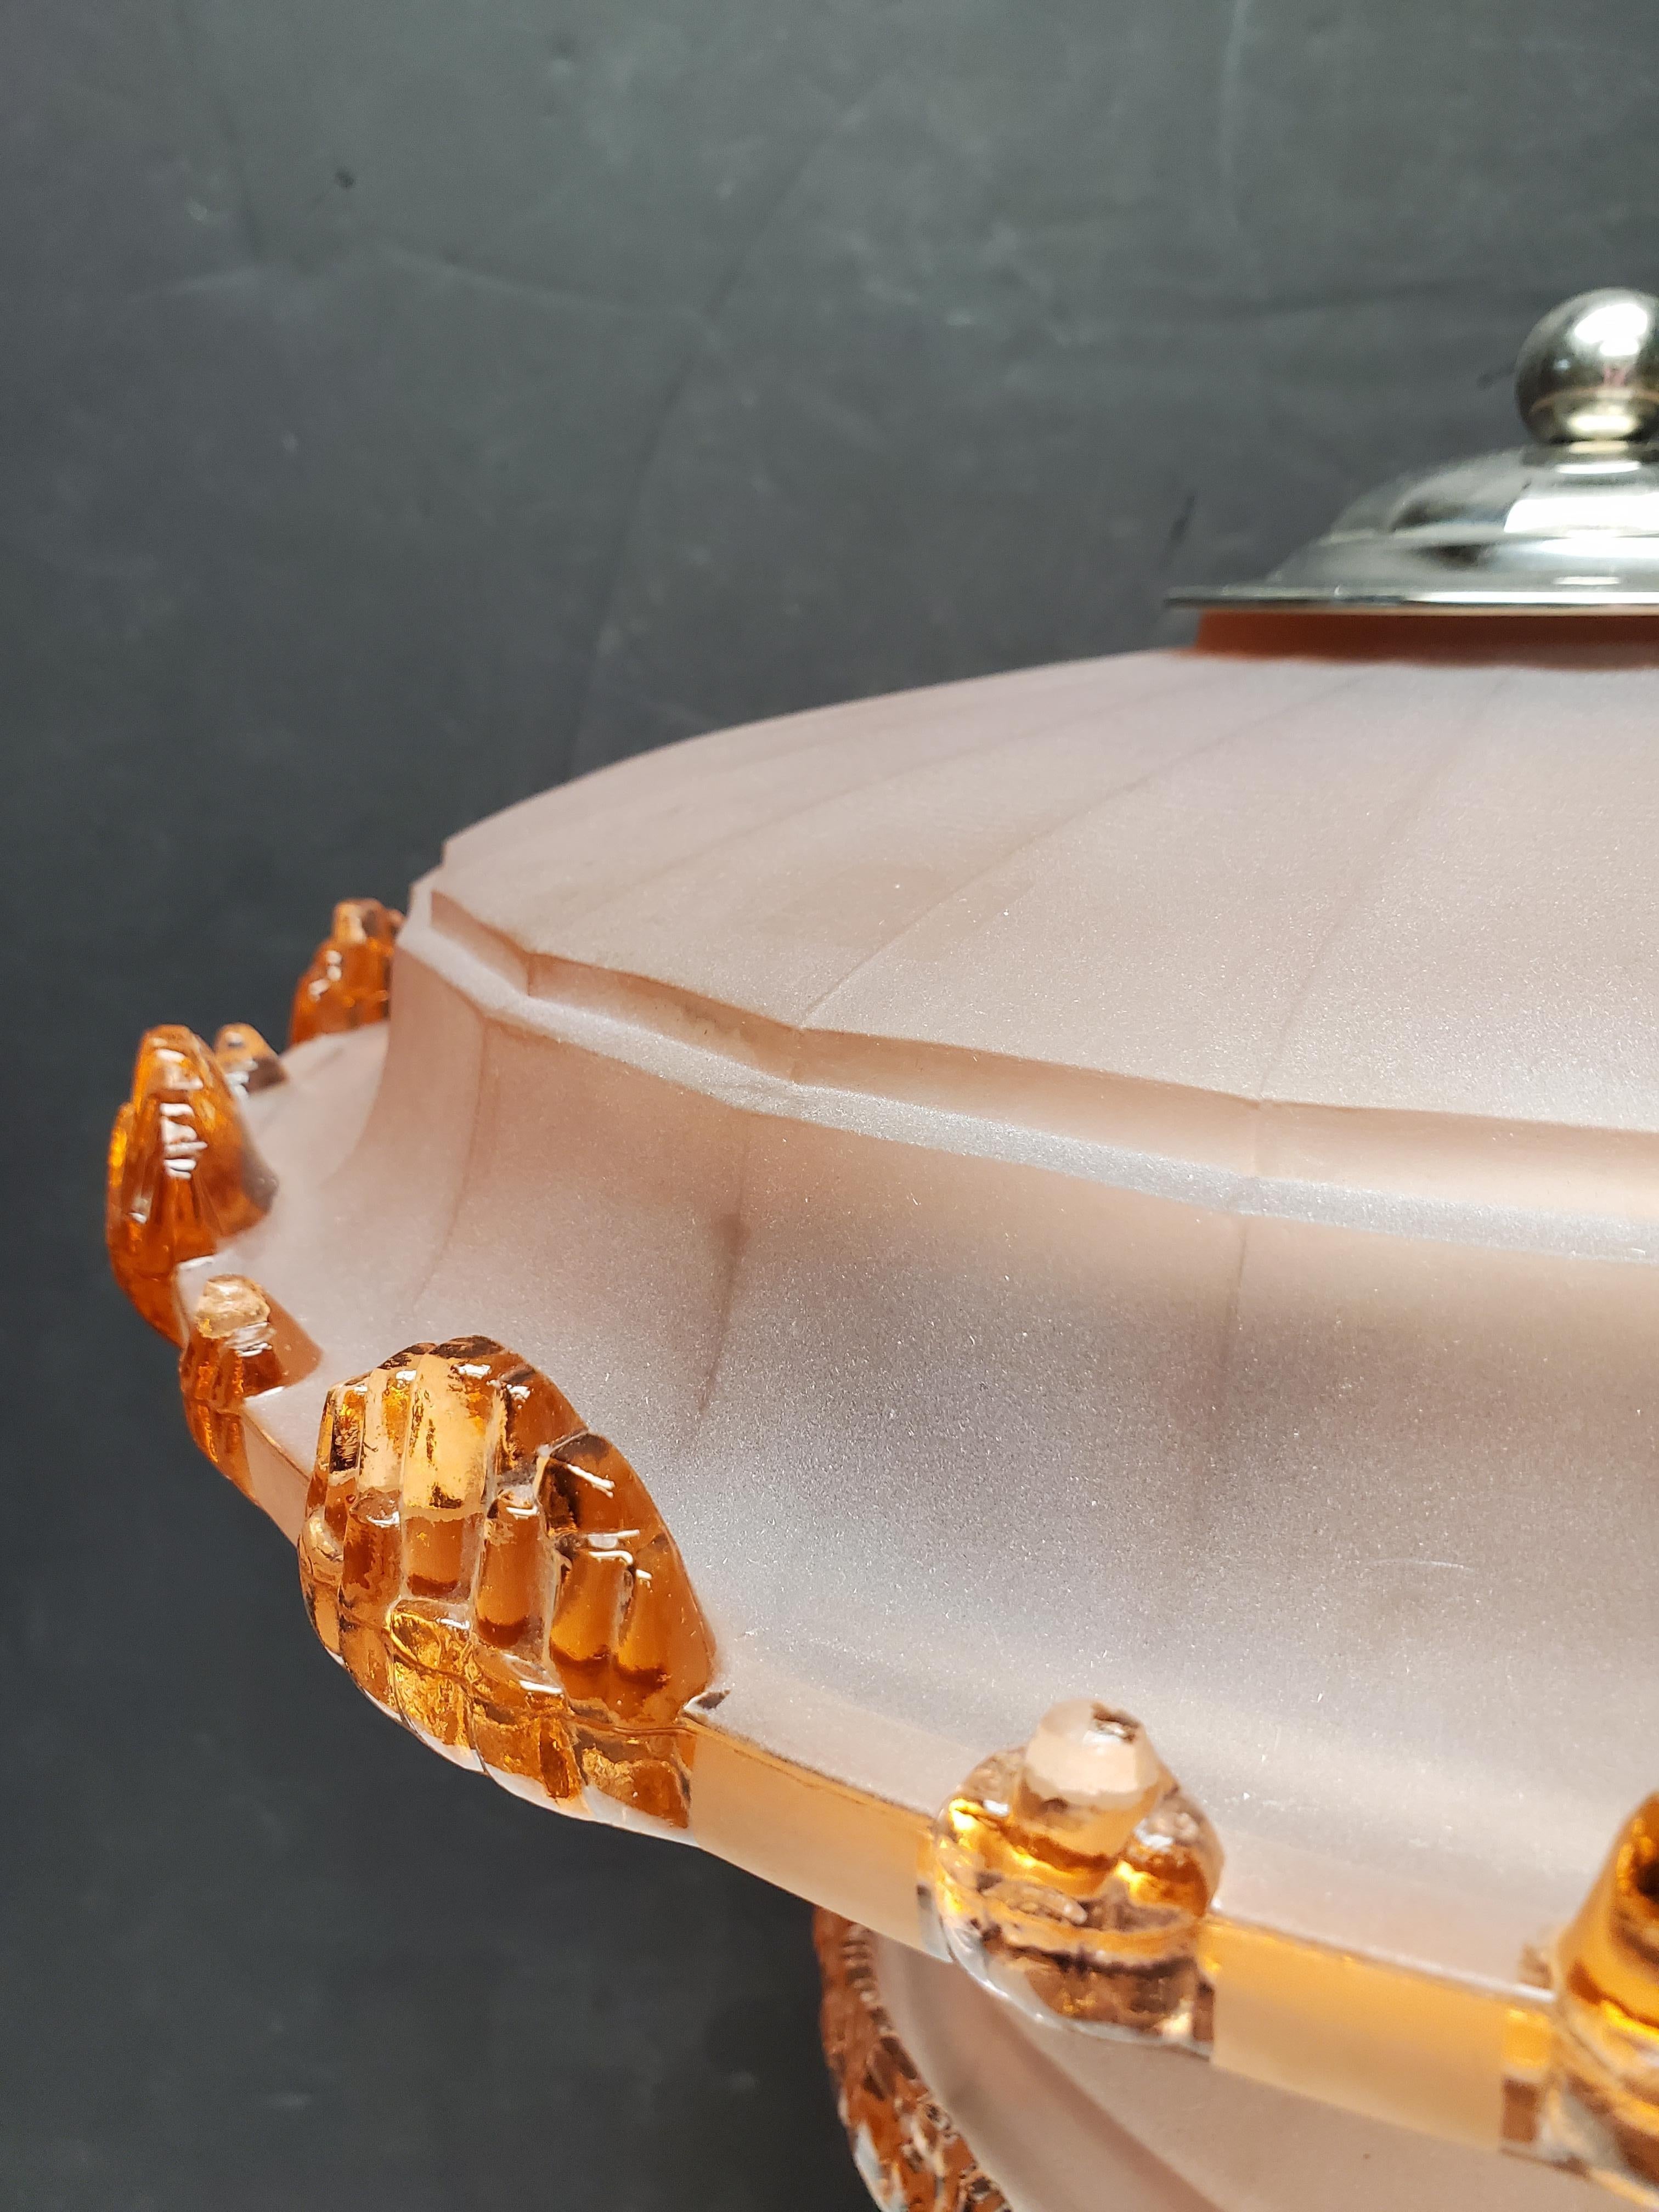 Original French Art Deco Pink/Peach Art Glass Table Lamp by Jean Gauthier For Sale 10